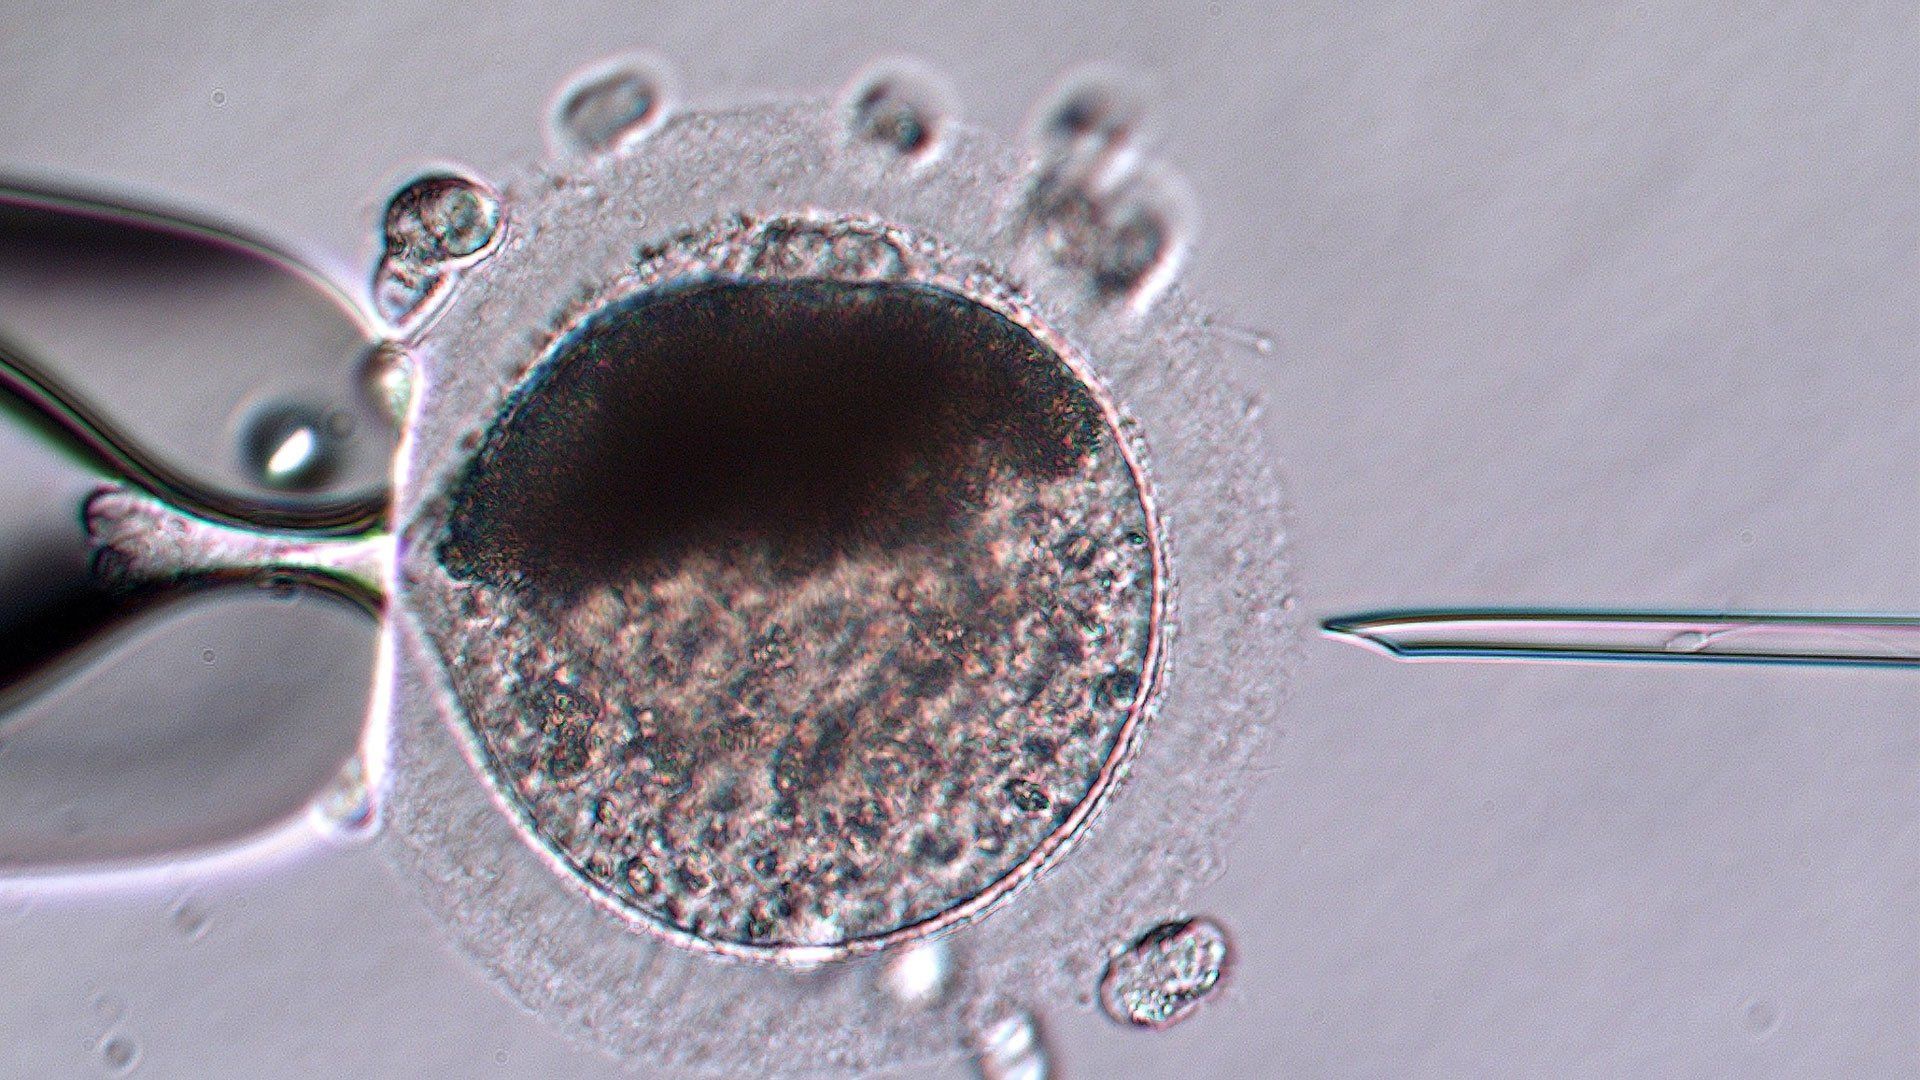 Oocytes (eggs) are collected from follicles on the ovaries by transvaginal follicular aspiration (TVA), also called ovum pickup (OPU).